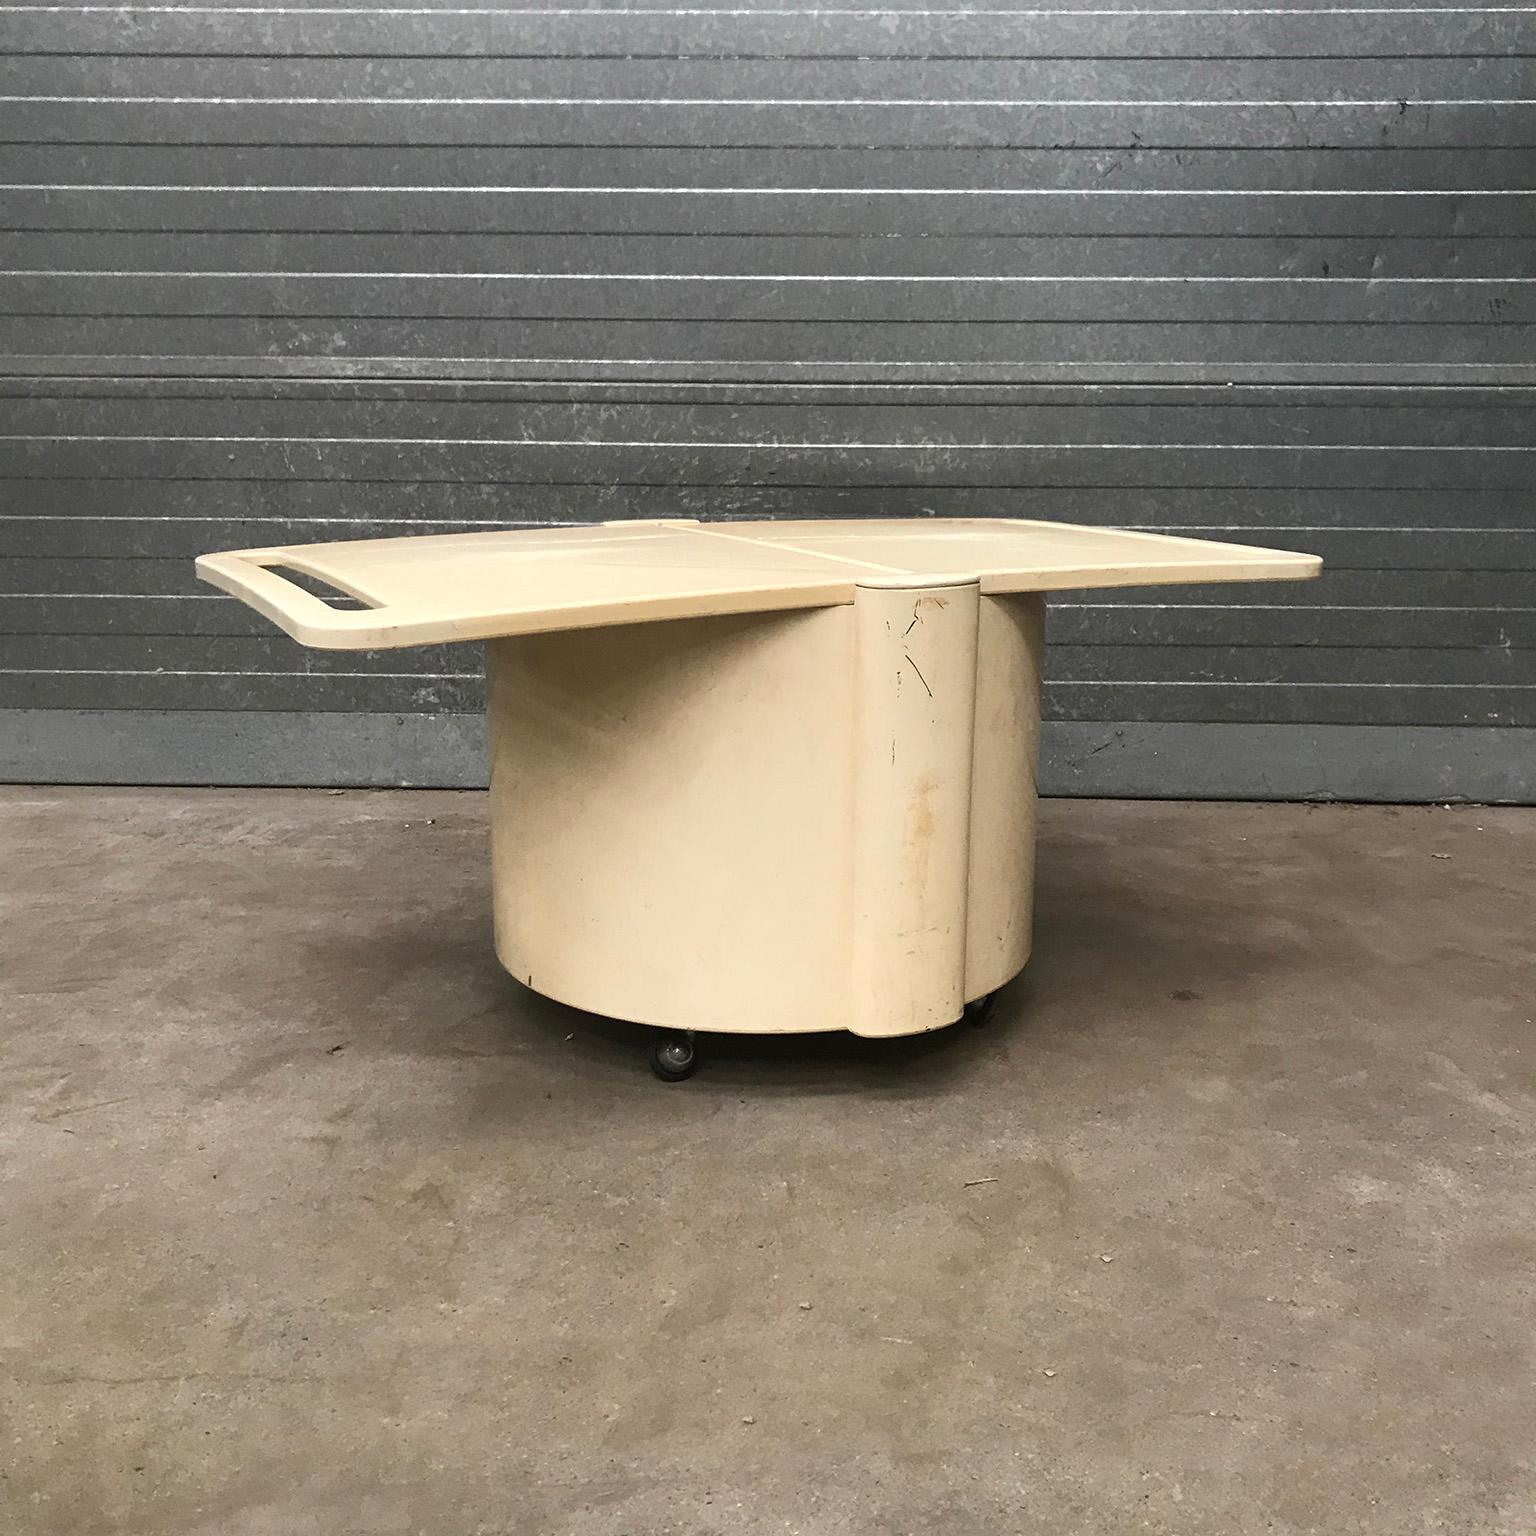 Mobile 1970s Plastic Vintage Space Age Bar in Off-White, circa 1970 For Sale 3